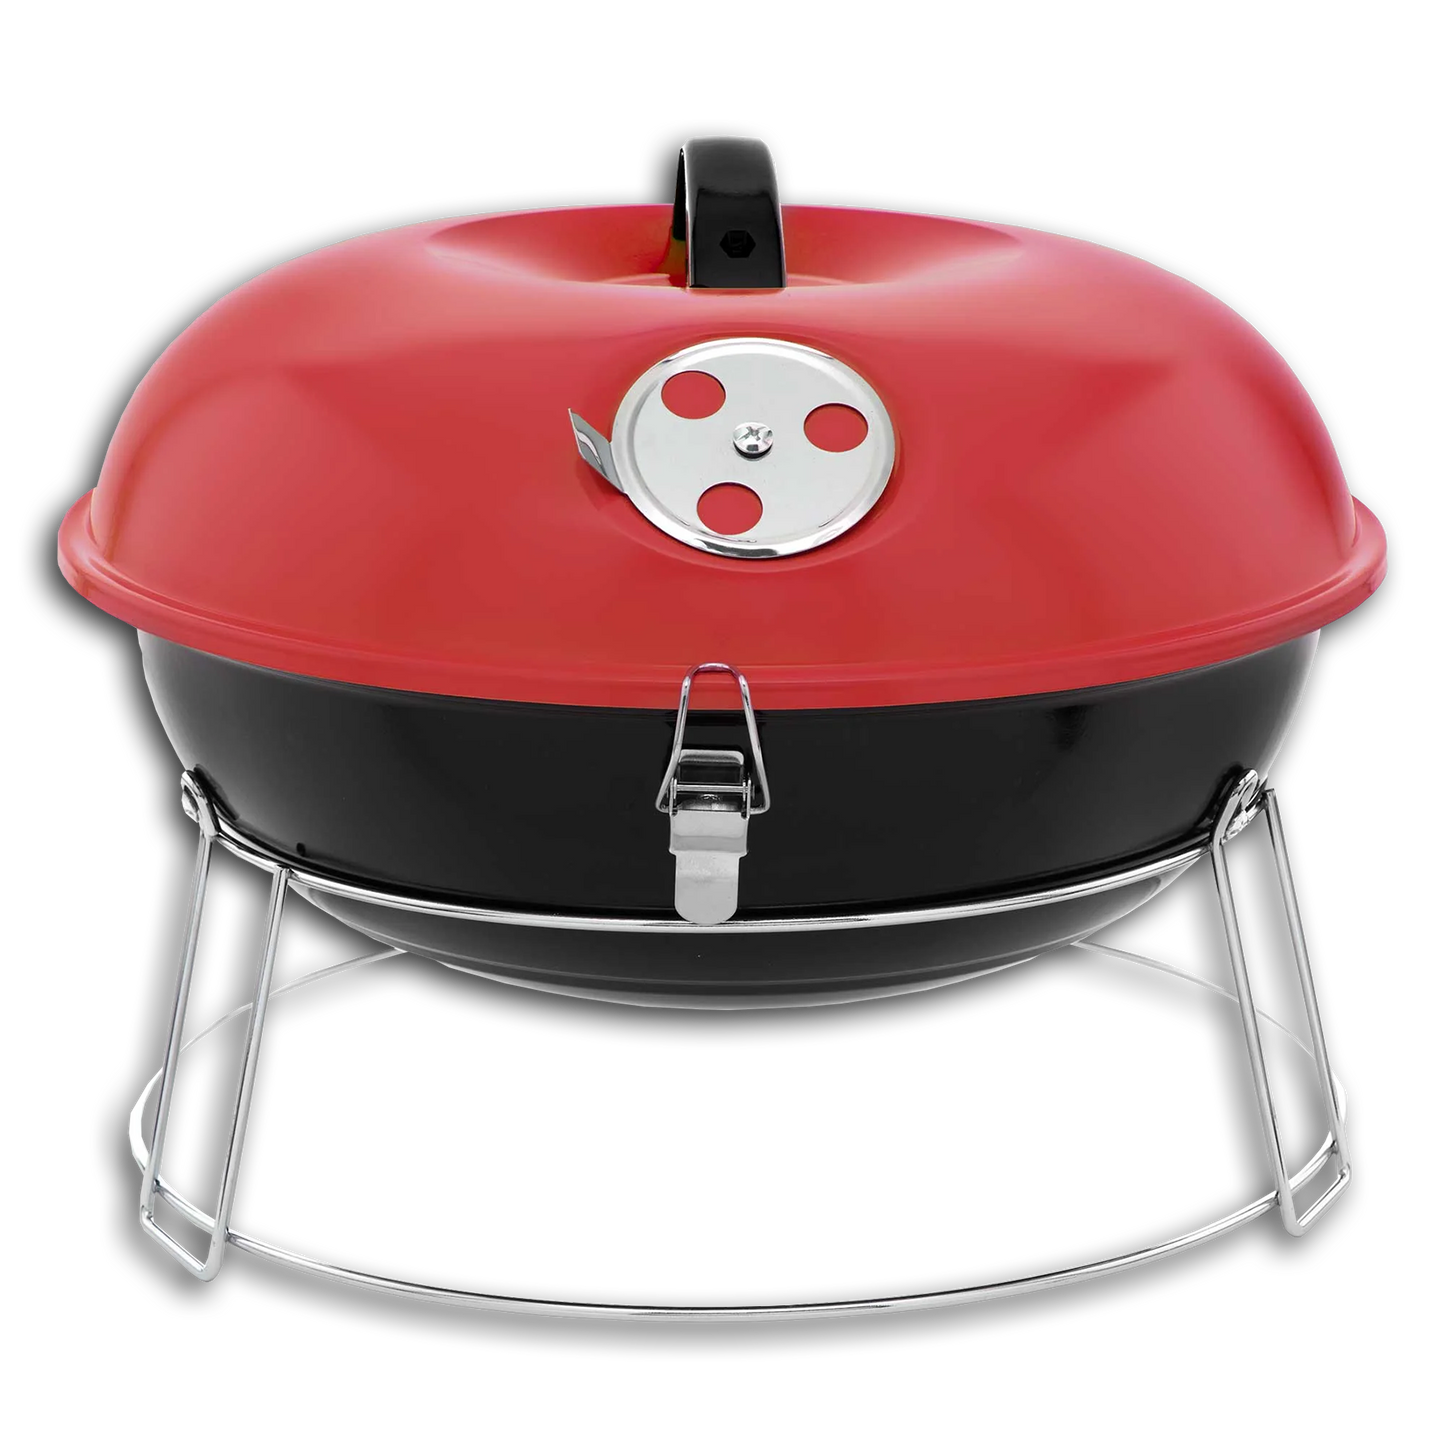 14" PORTABLE CHARCOAL GRILL